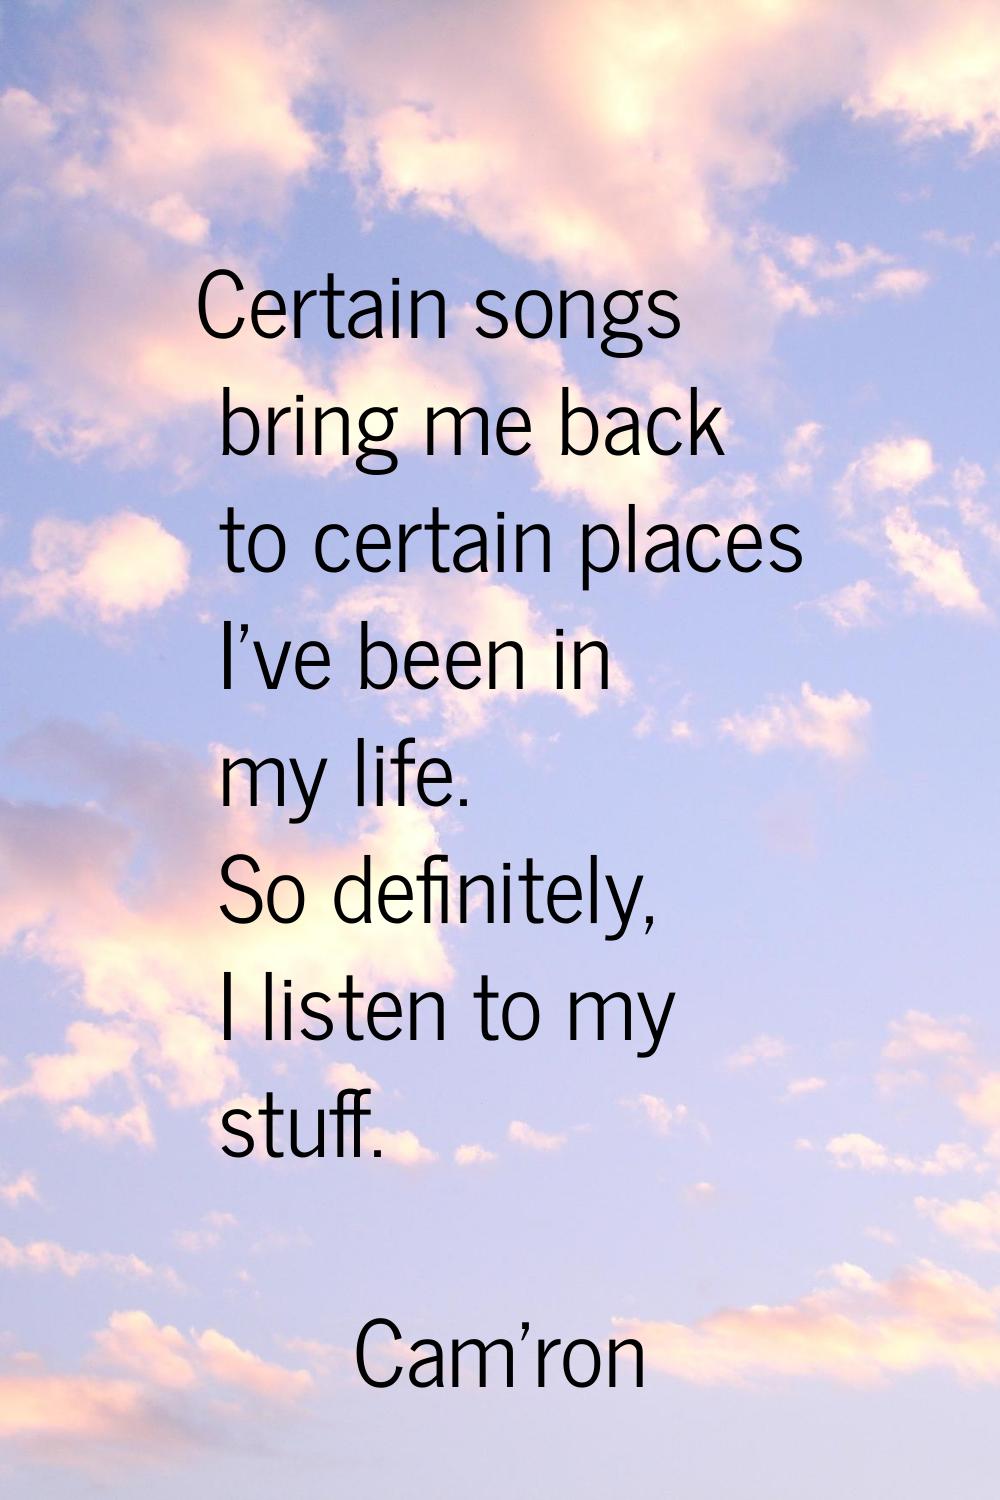 Certain songs bring me back to certain places I've been in my life. So definitely, I listen to my s